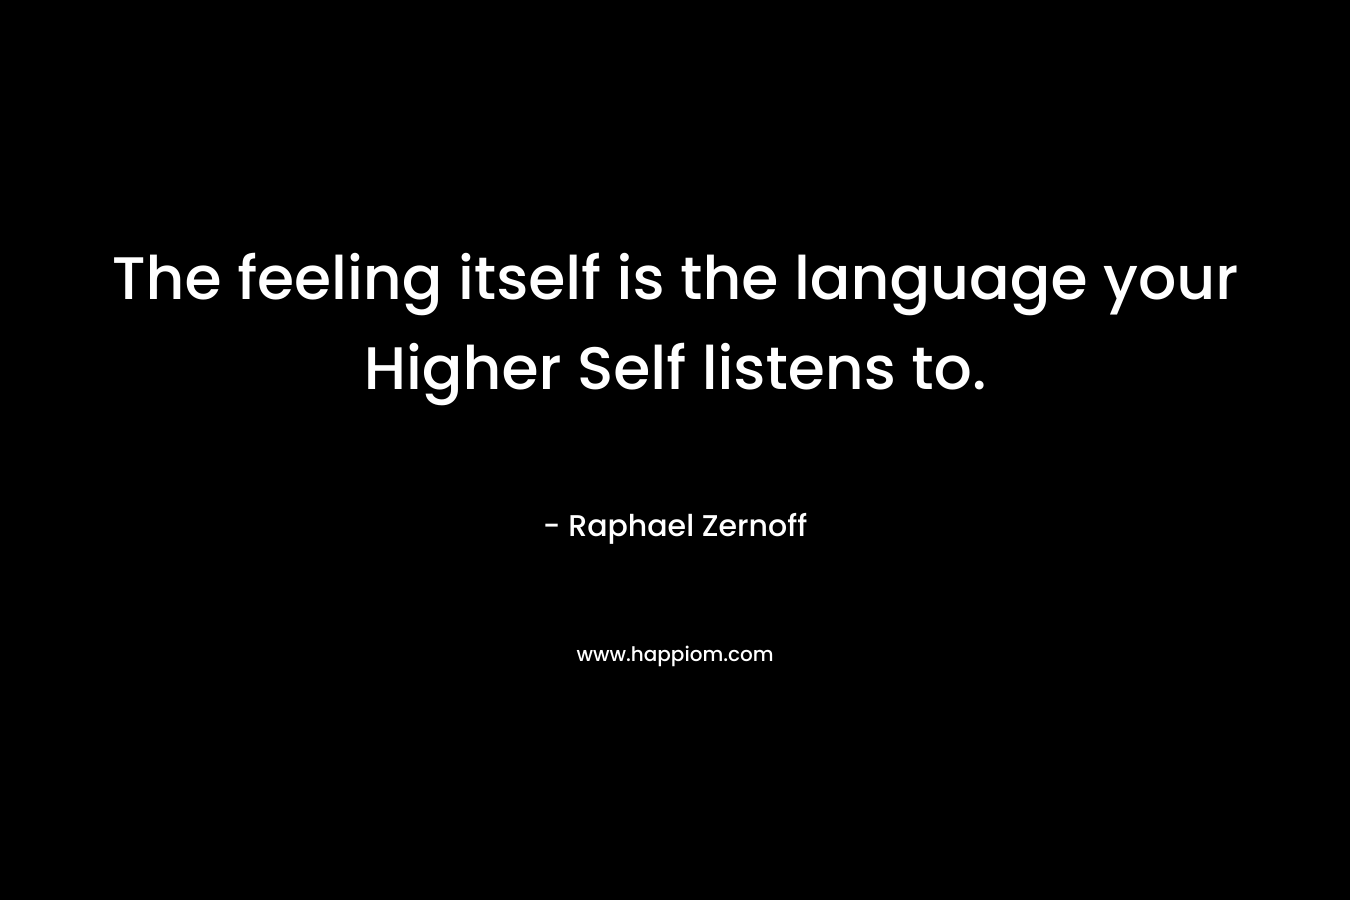 The feeling itself is the language your Higher Self listens to. – Raphael Zernoff